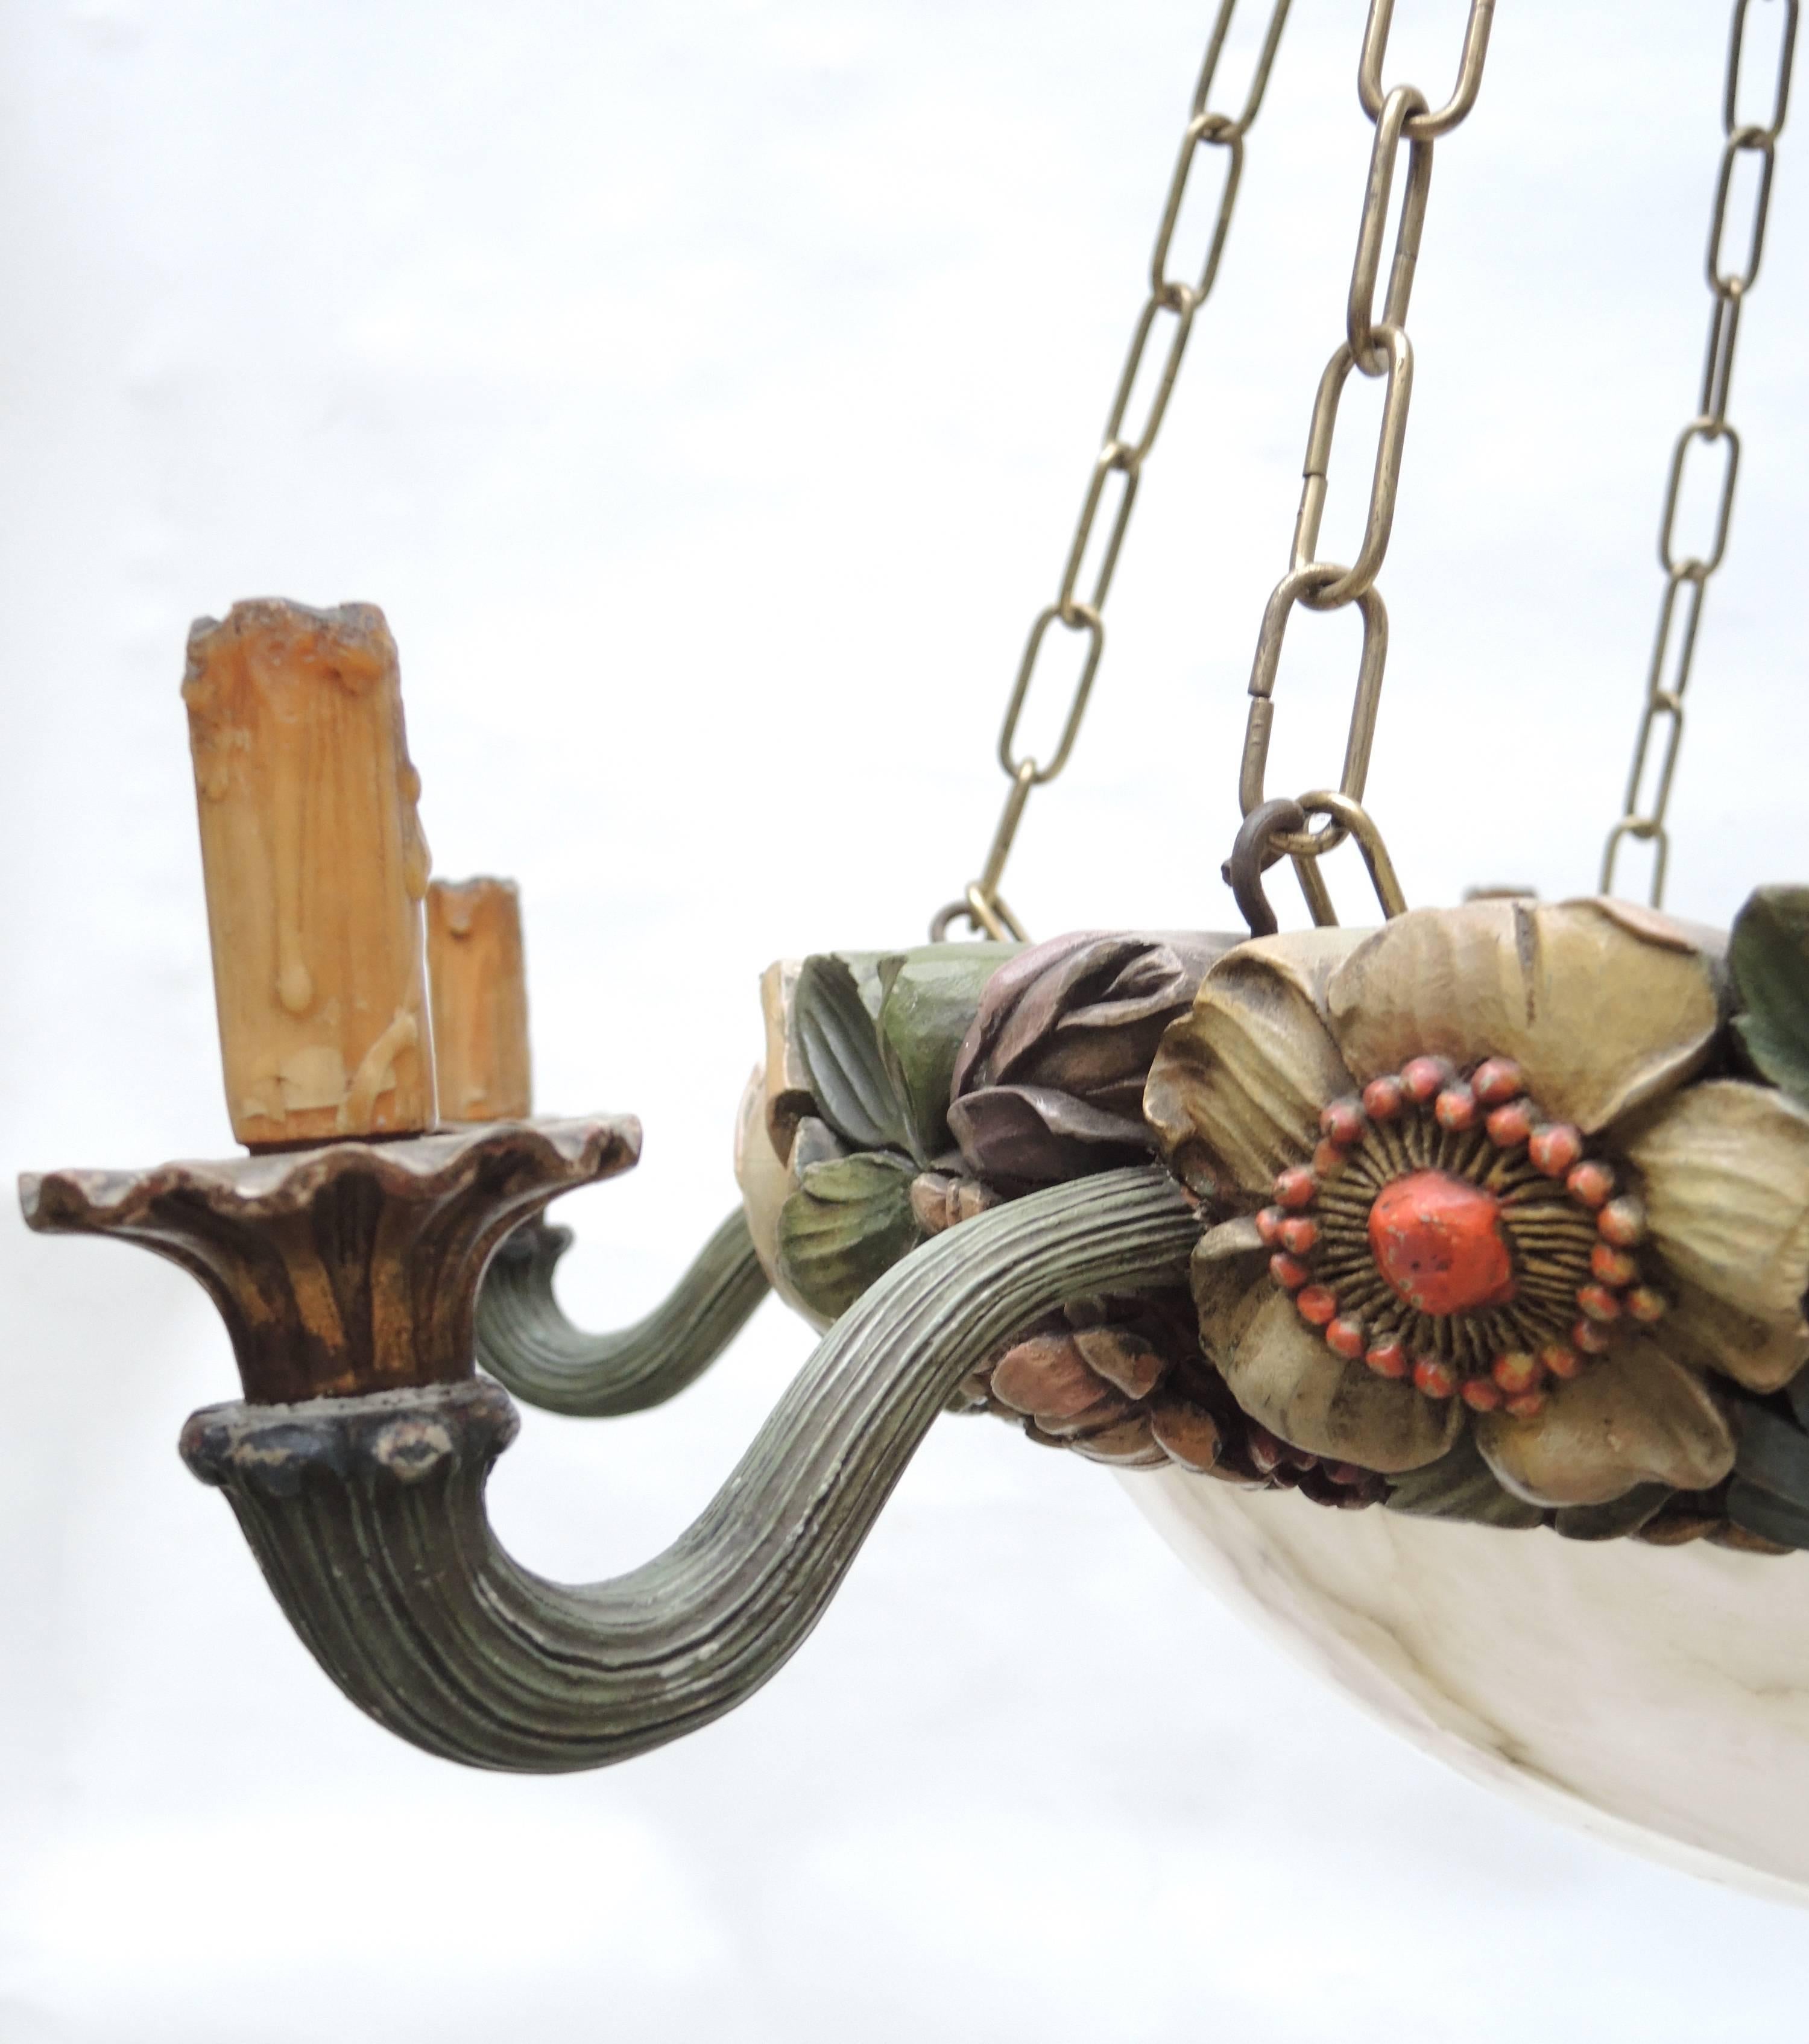 Large period, 1880 Art Nouveau chandelier. Beautifully executed hand carved wood retains all the original paint in excellent condition. Large Alabaster stone bowl with interior sockets provide a theatrical glow that adds to the sculptural excellence